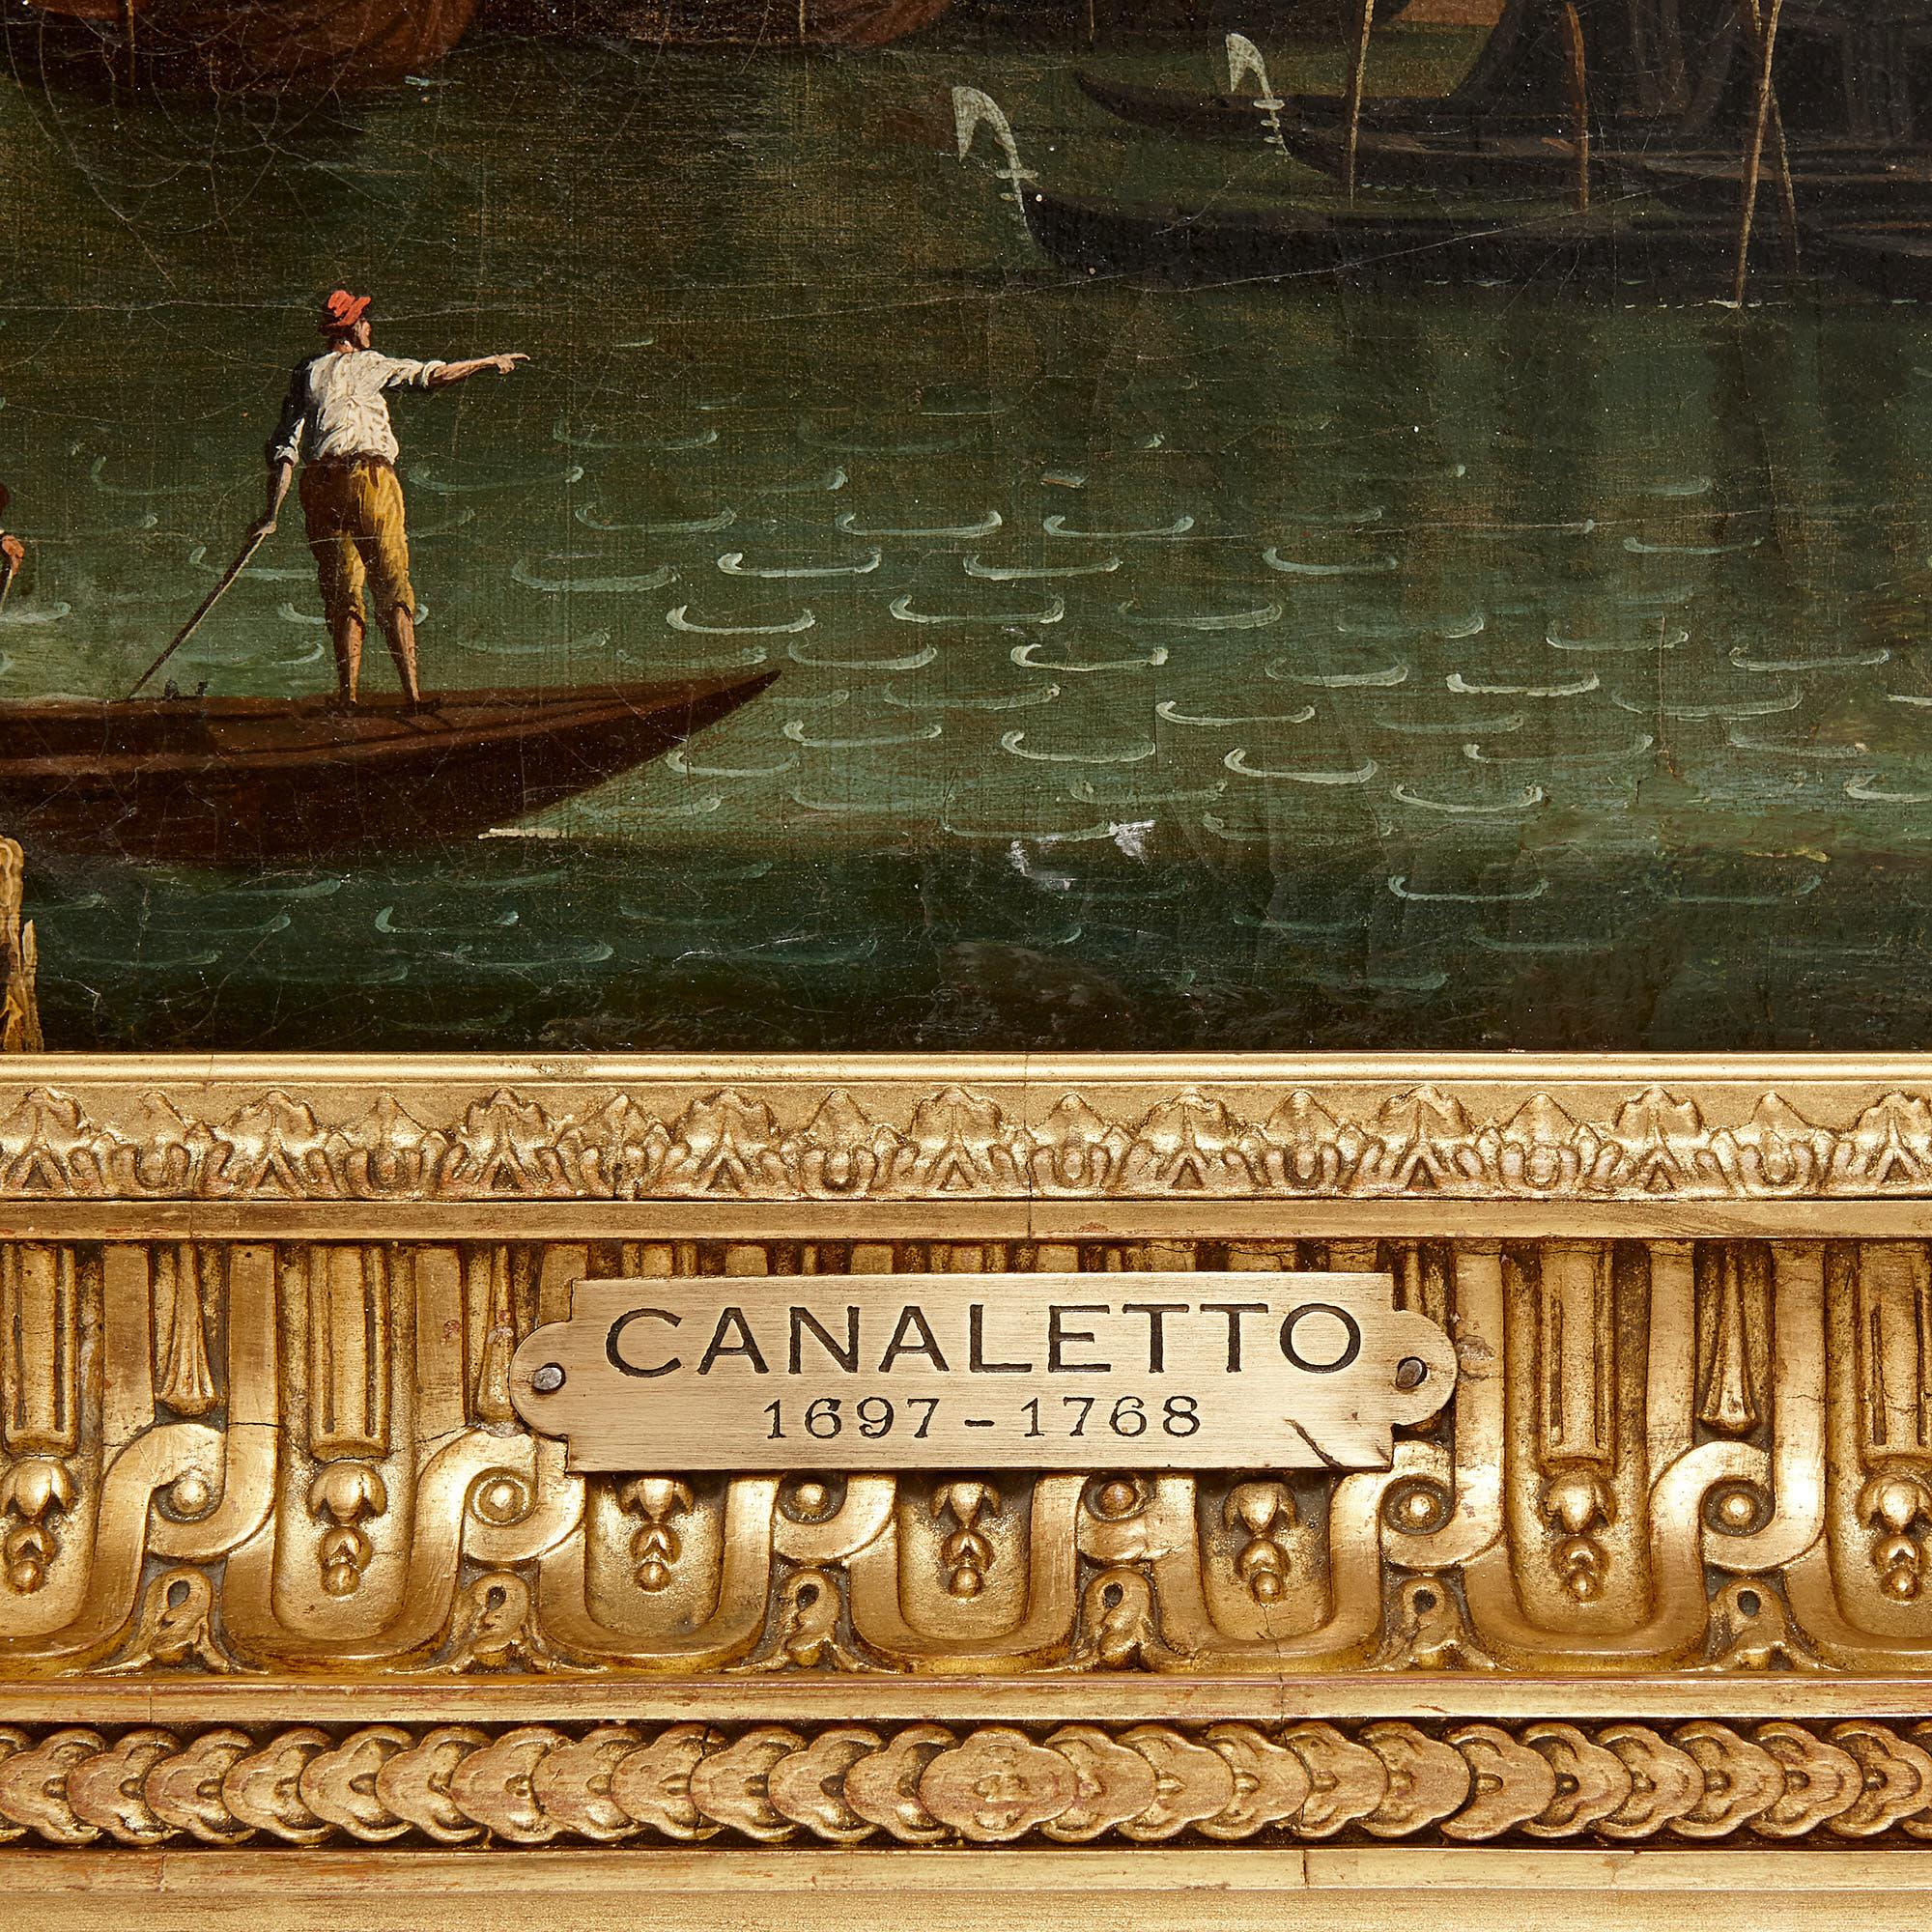 vedute painting in the manner of canaletto